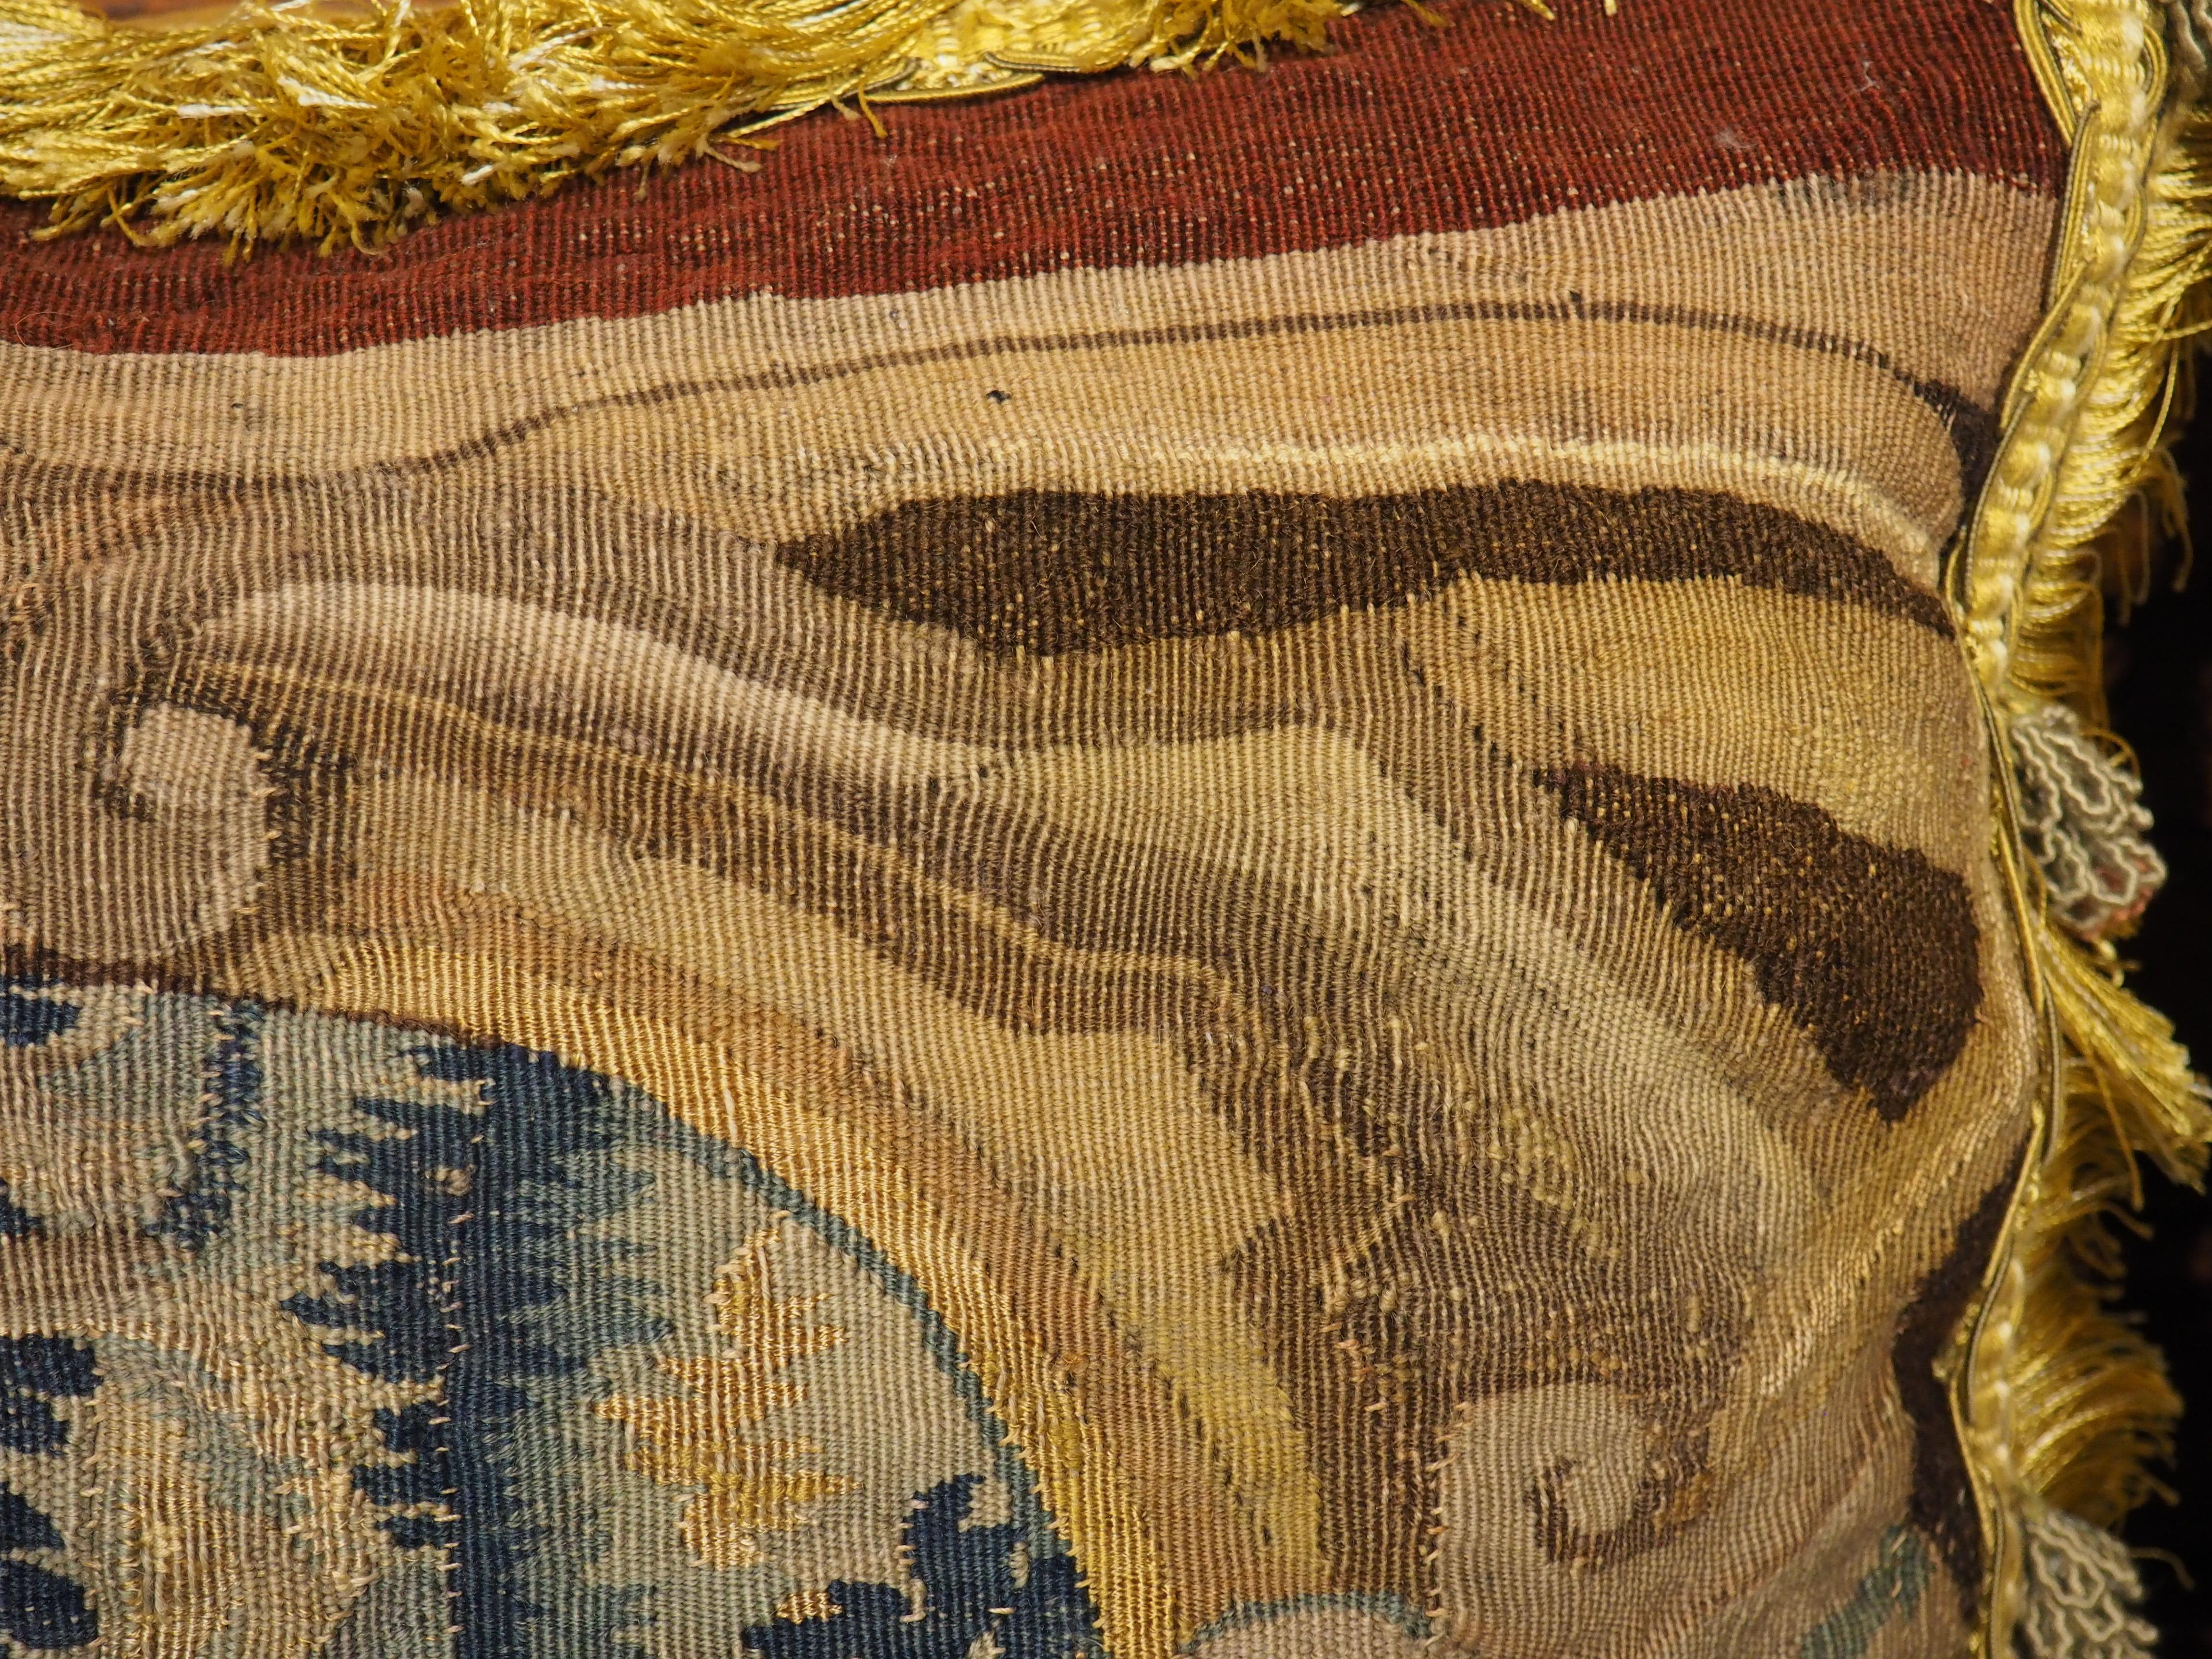 Textile Two Tapestry Pillows from 17th Century Audenarde Fragments